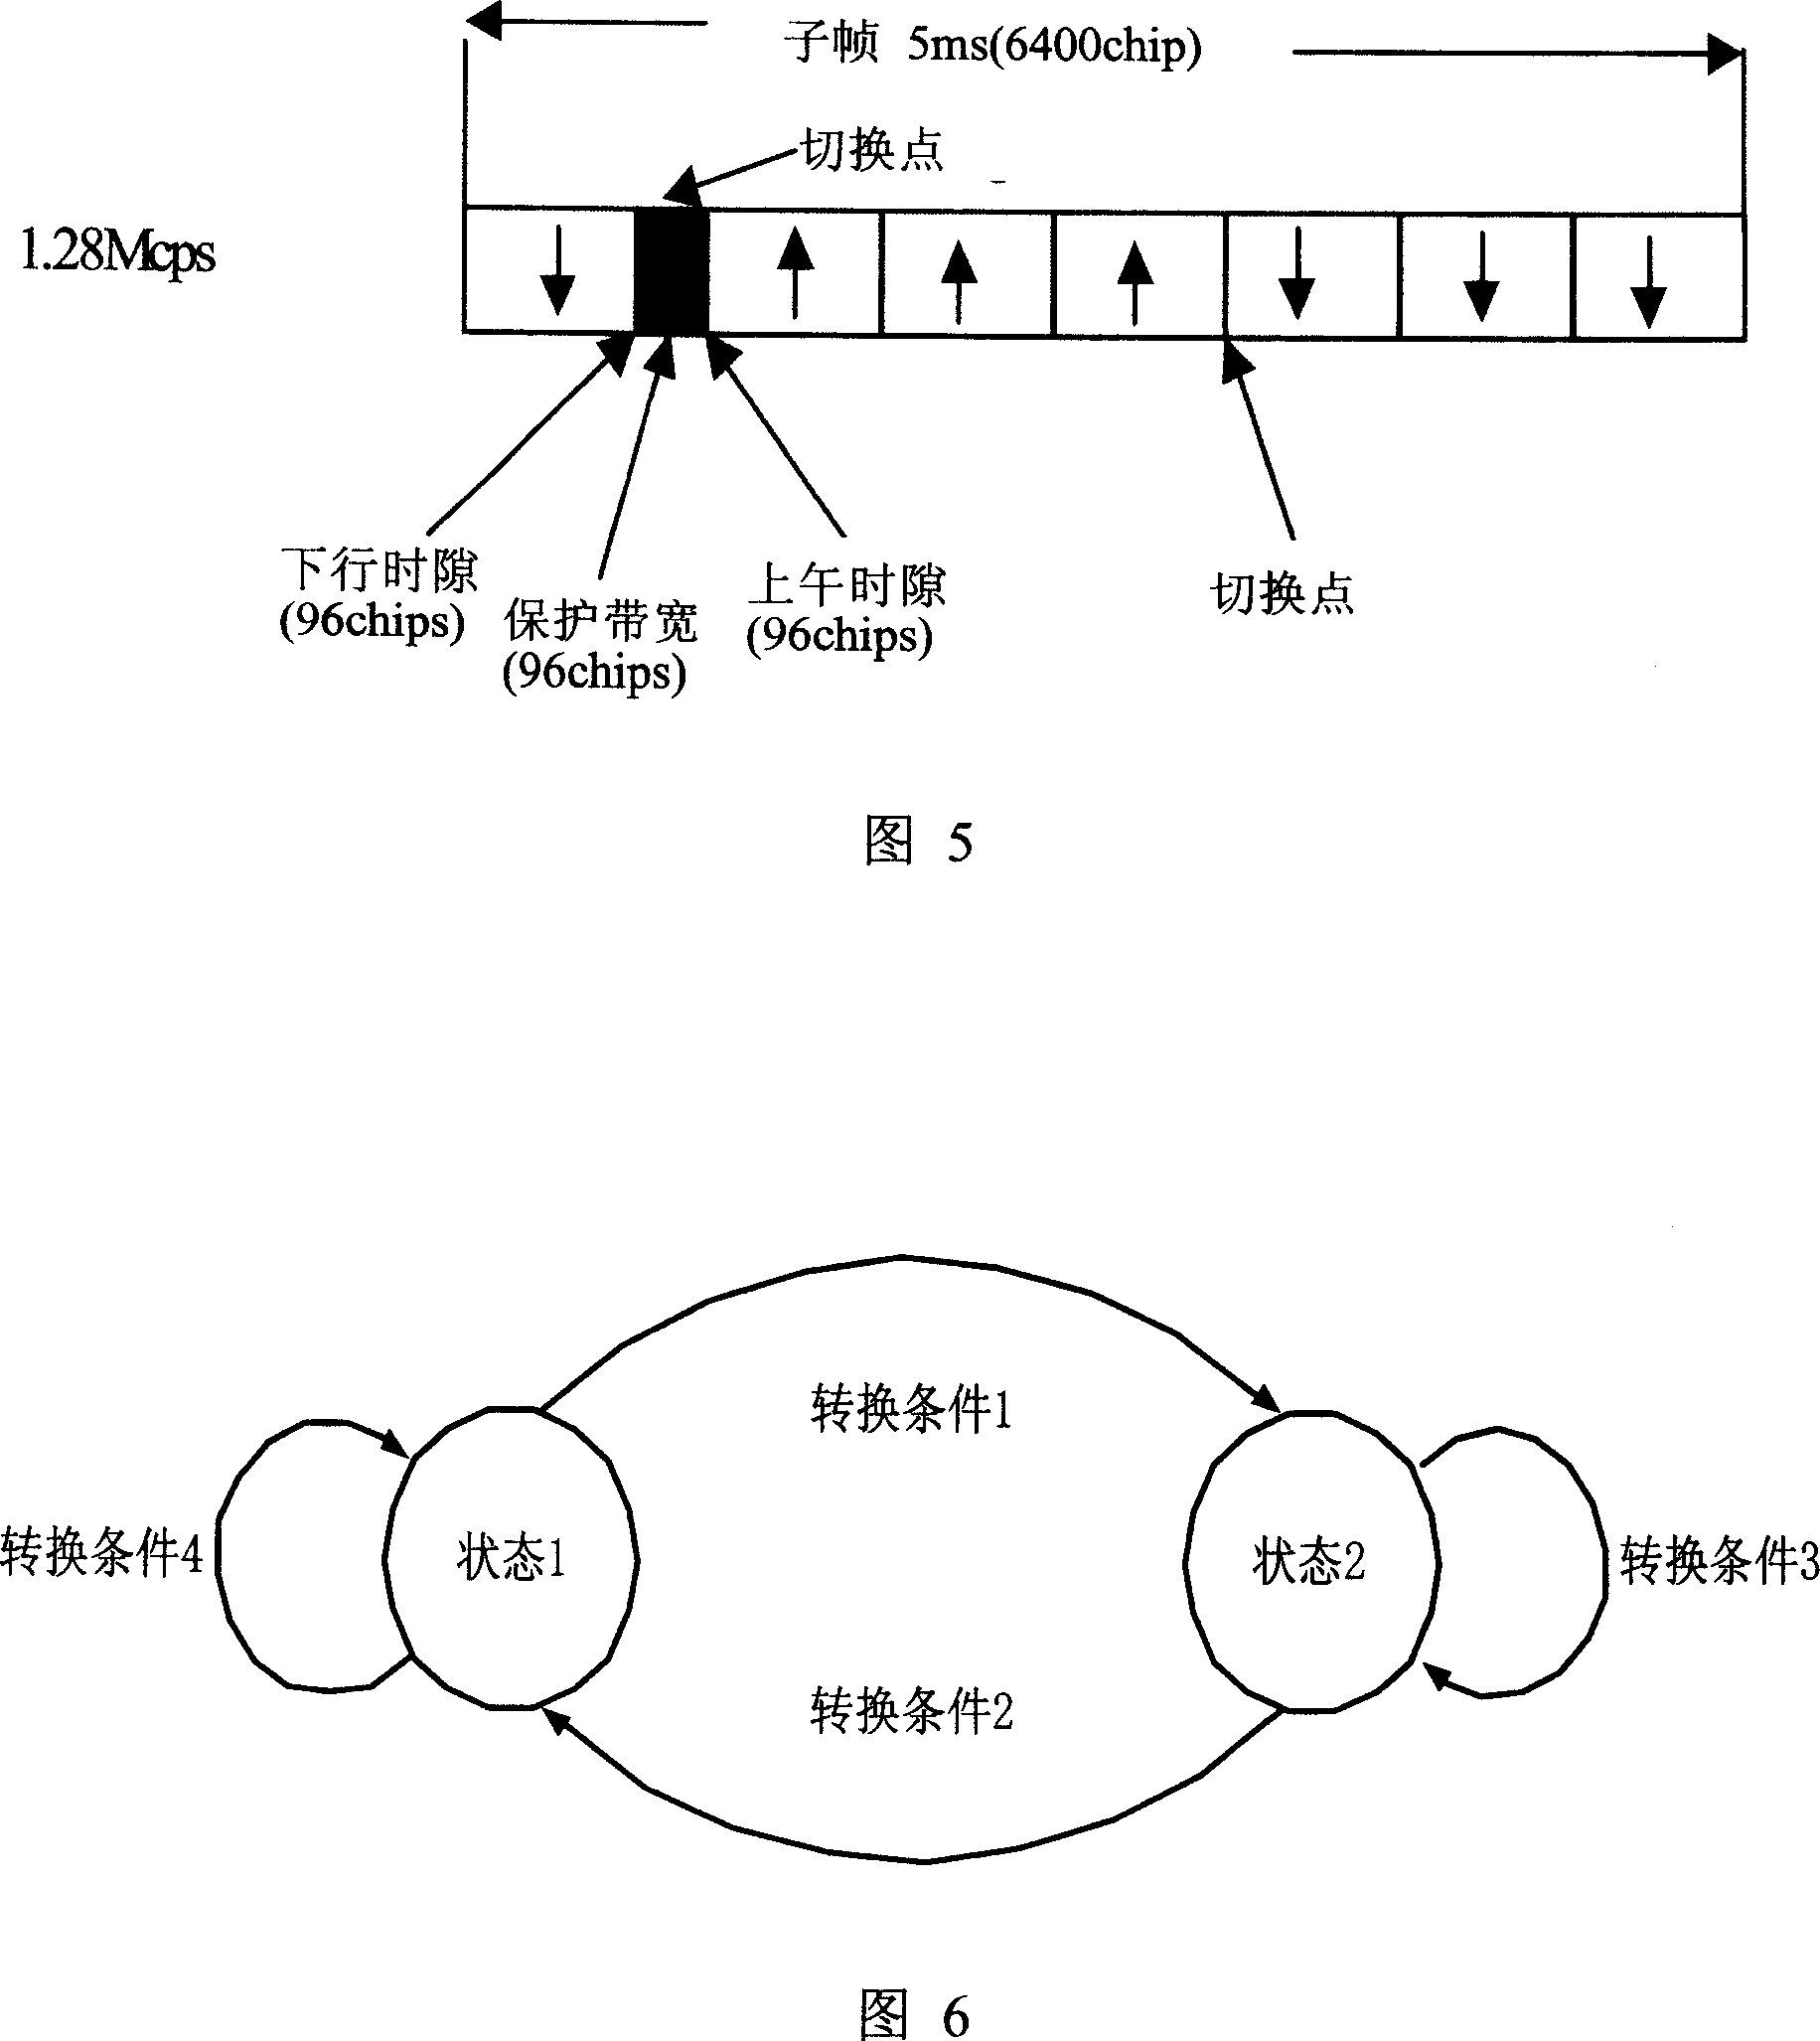 Cross-zone handover method for time division synchronous CDMA multi-frequency-point community cellular network